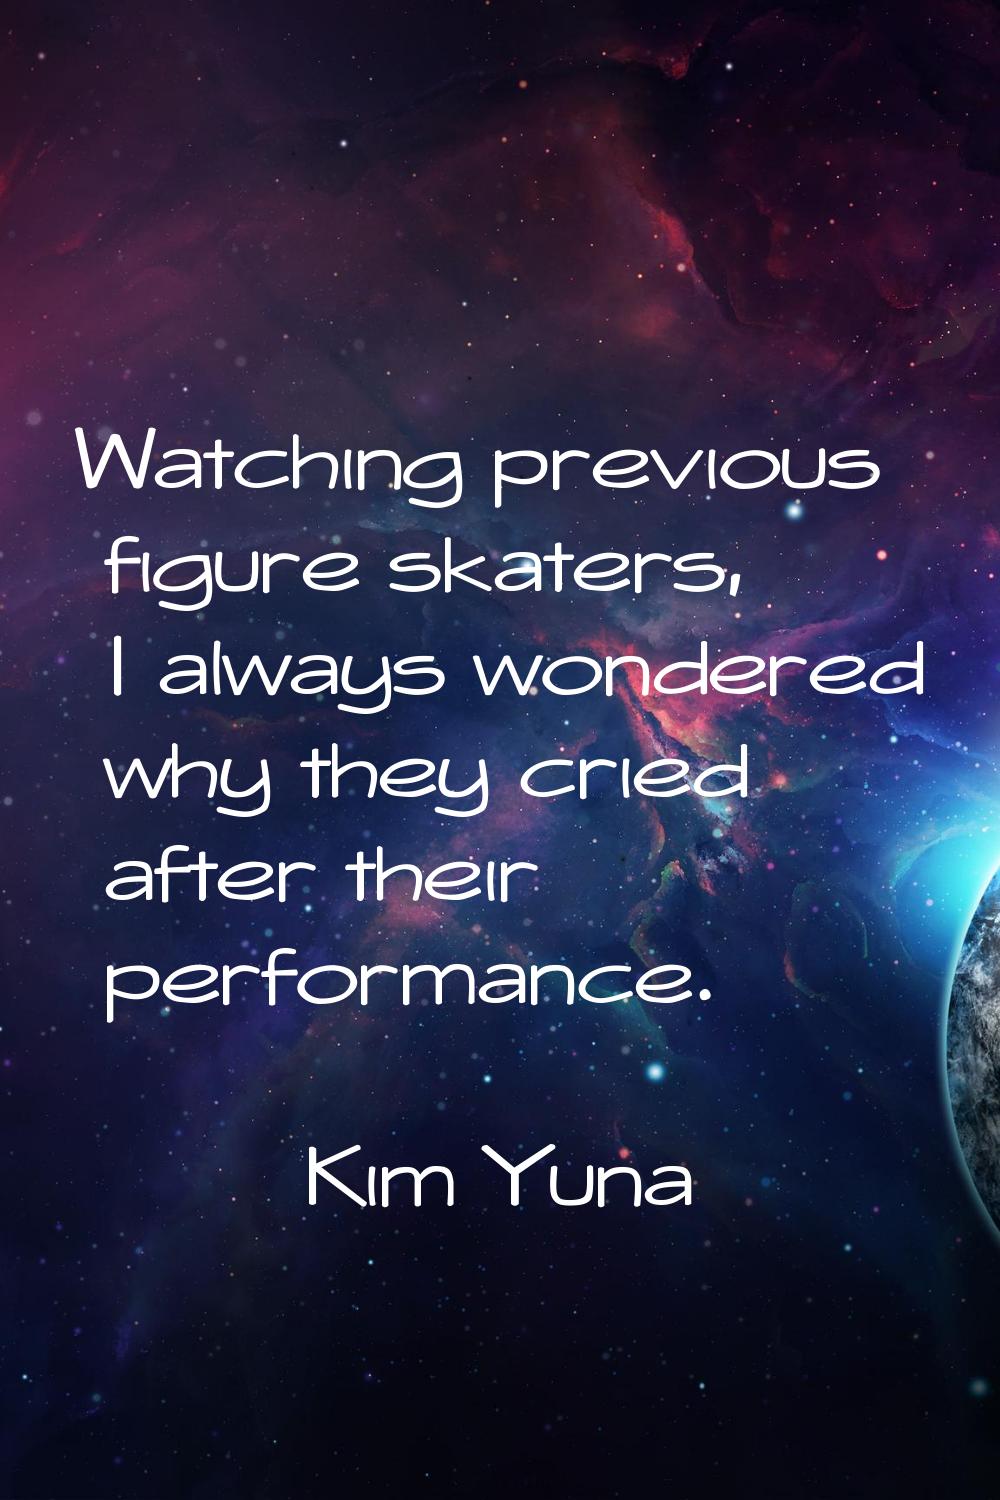 Watching previous figure skaters, I always wondered why they cried after their performance.